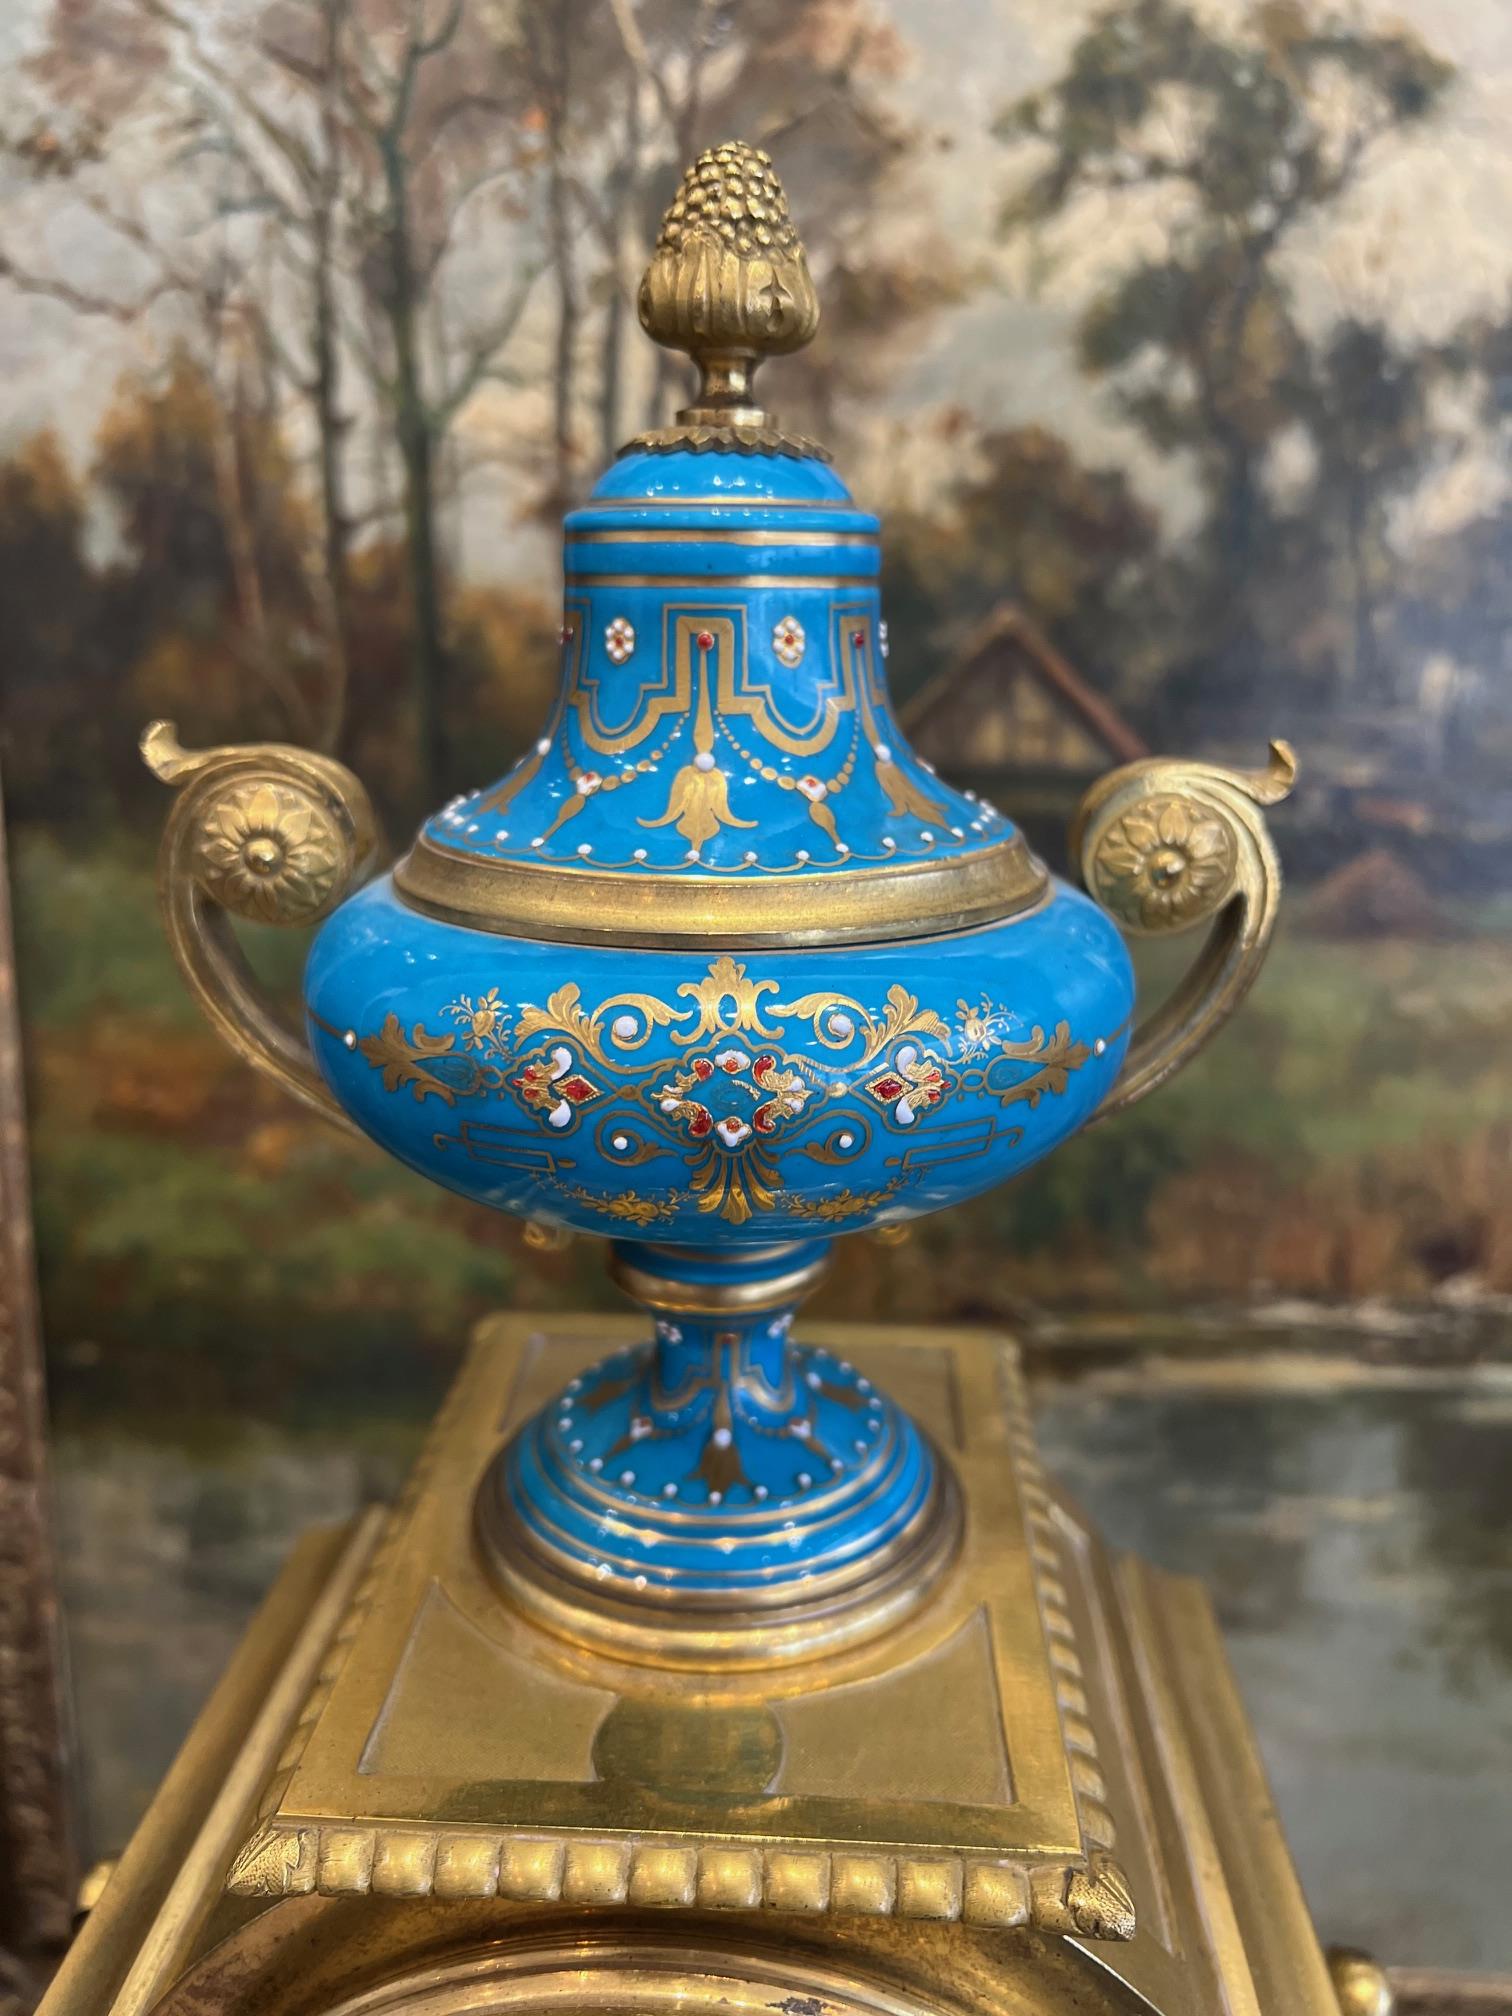 A FINE 19TH CENTURY PORCELAIN MANTEL CLOCK REPUTEDLY OWNED BY EMPRESS EUGENIE, WIFE OF NAPOLEON III - Image 5 of 8